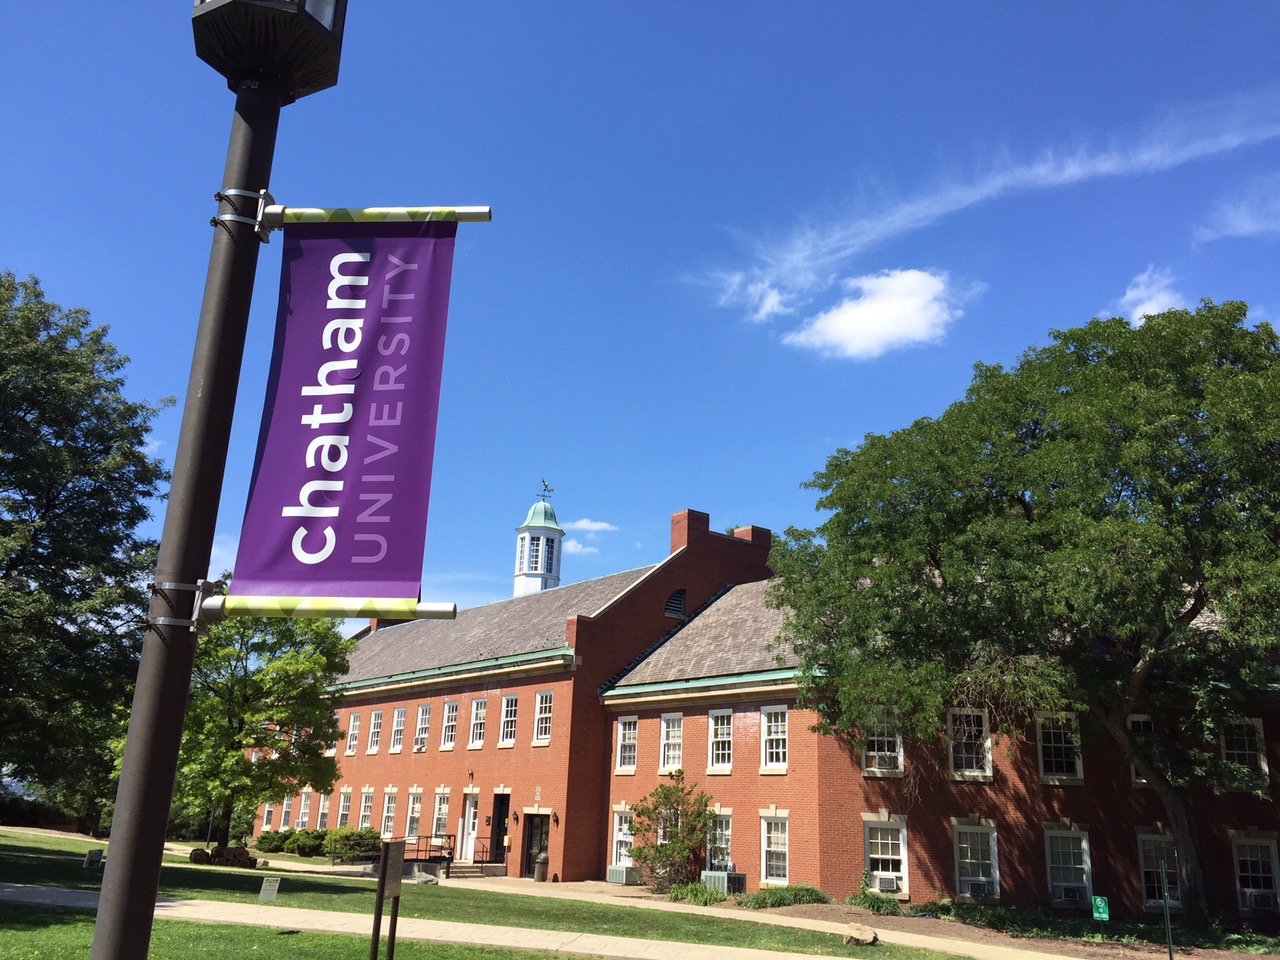 a red brick building with a copper cupola sits behind a banner for Chatham University